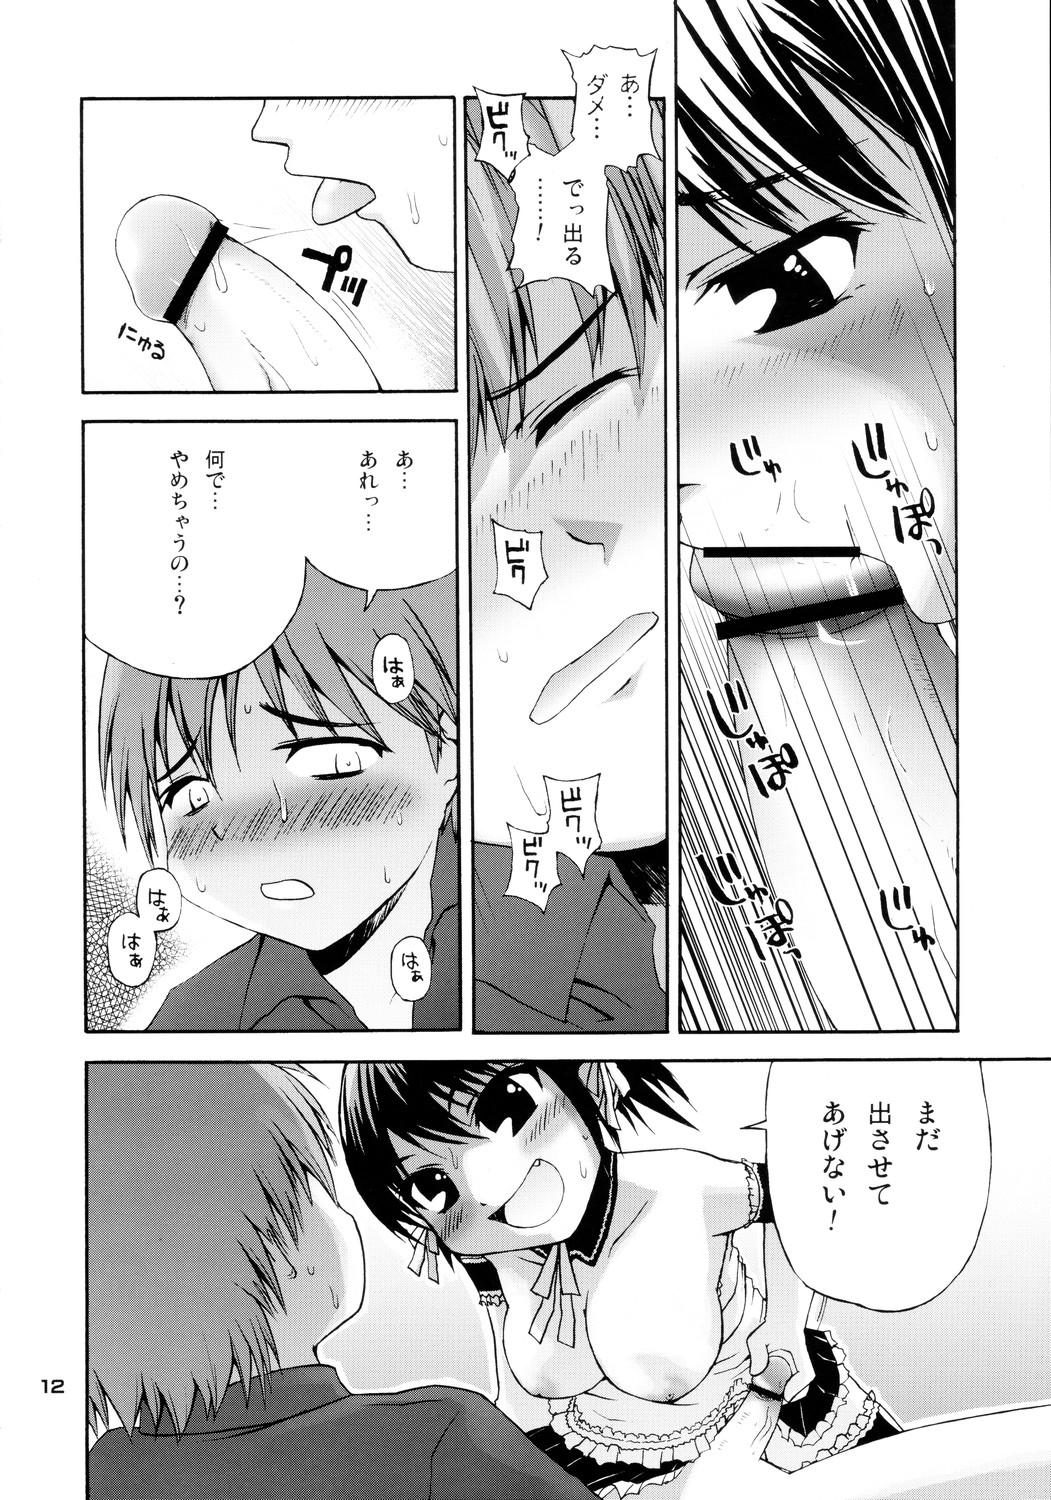 Sluts Izumi Double-Booking - He is my master Screaming - Page 11